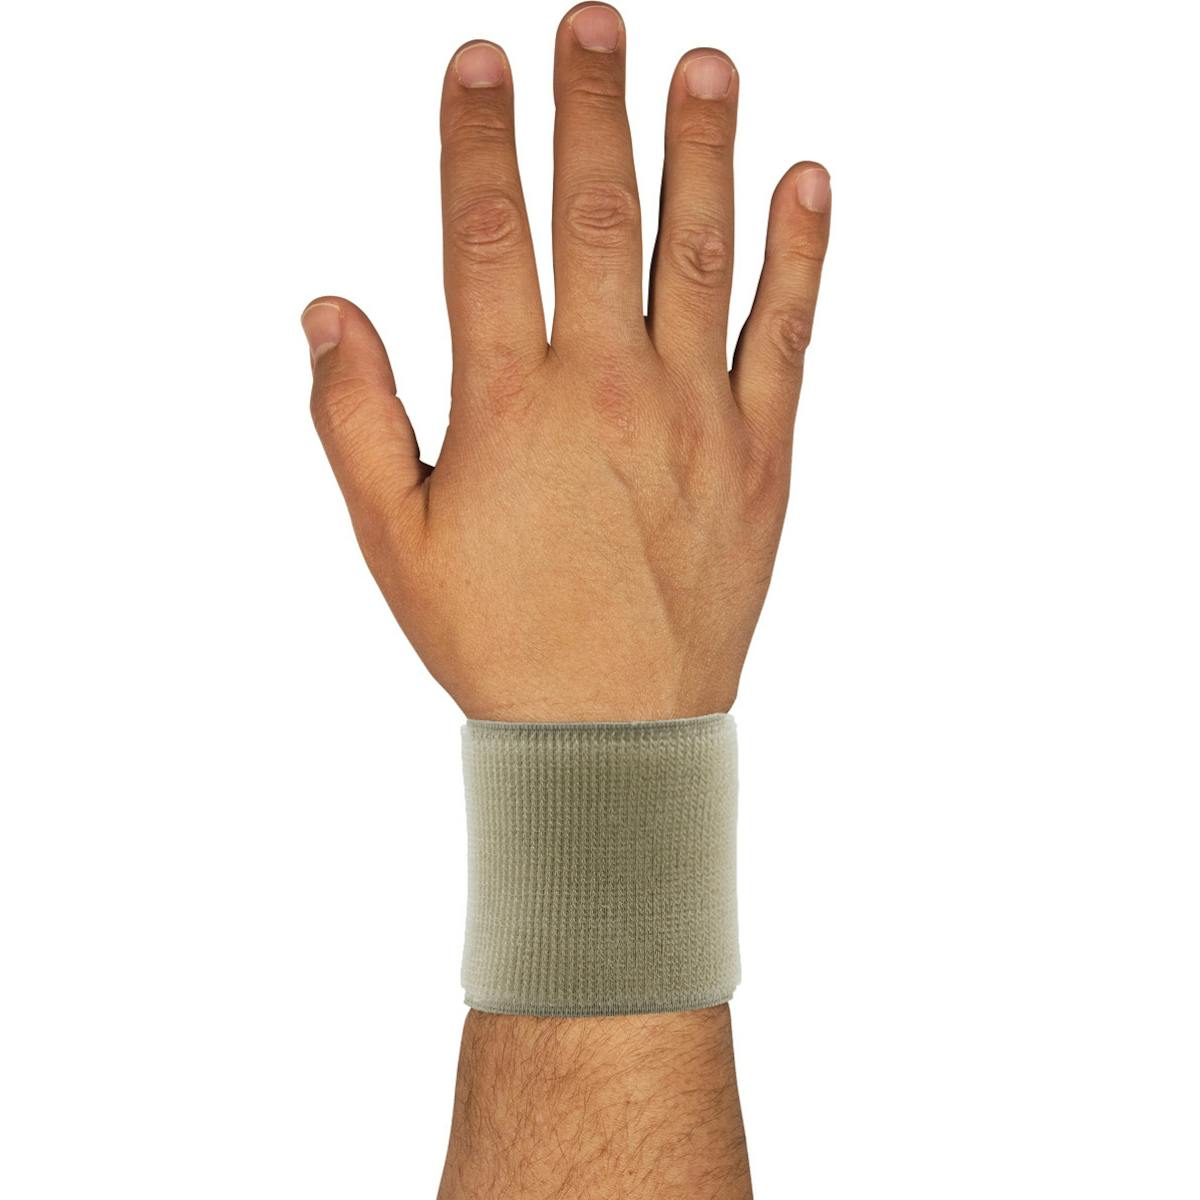 Stretchable Wrist Support, Beige (290-9010)